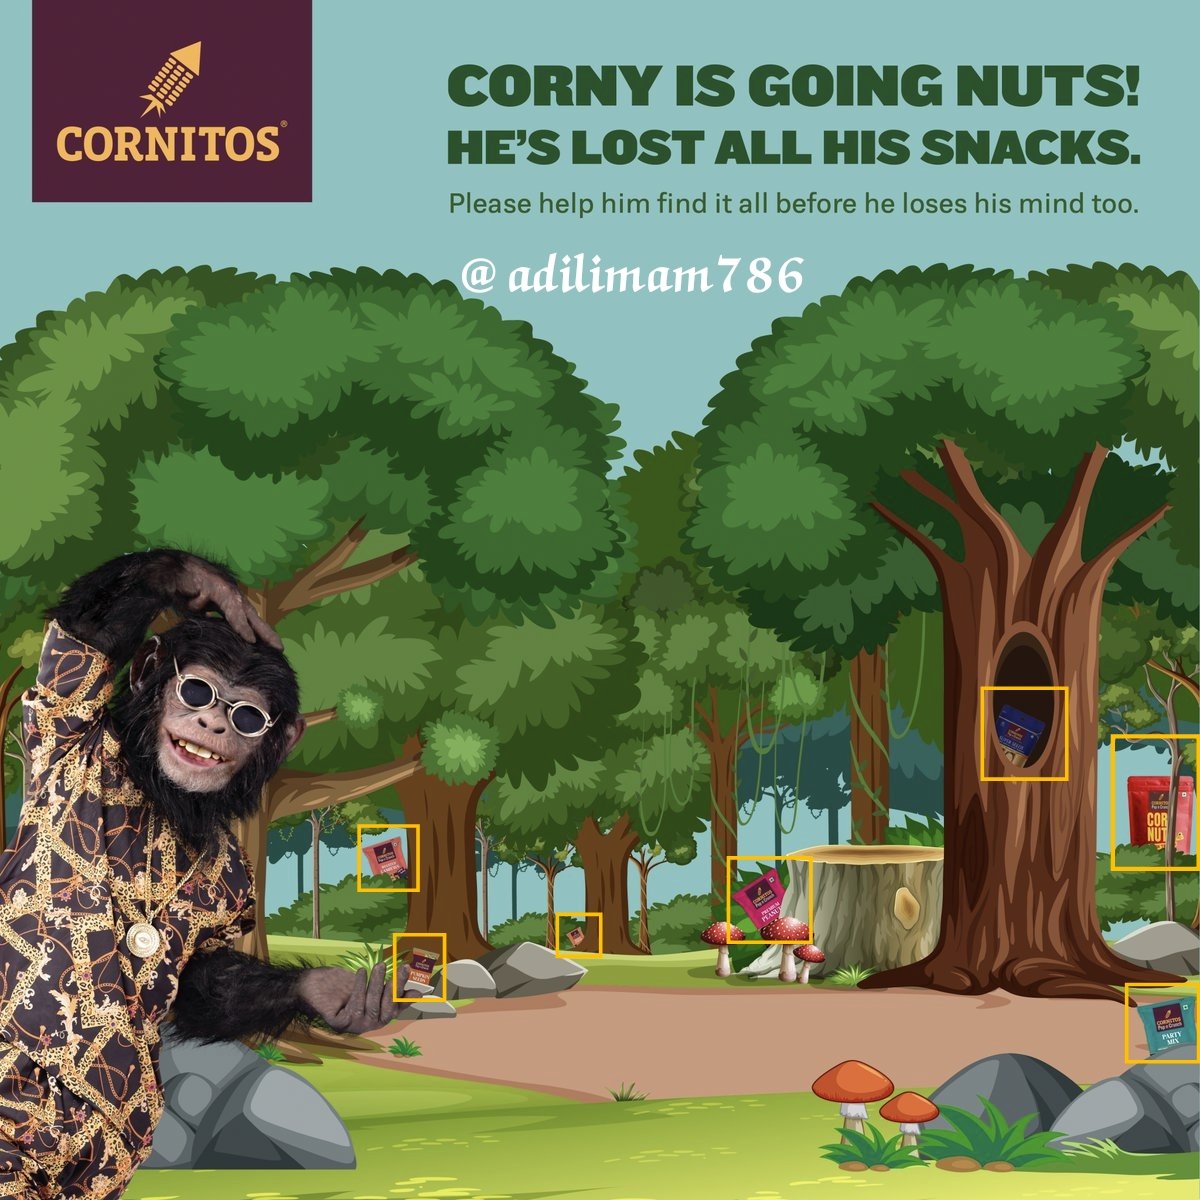 Time to lend a hand to Corny 🐒 and his snacks! 🌽🥜 Count me in for the challenge and tagging 3 friends to join the fun.

@sagar___02 @RCRTANWAR @ShekharlyRaj 

#GiveawayAlert #CornyChallenge #Cornitos #ContestAlert #WildAsYouLike #ILoveCornitos #Crusties #munchies